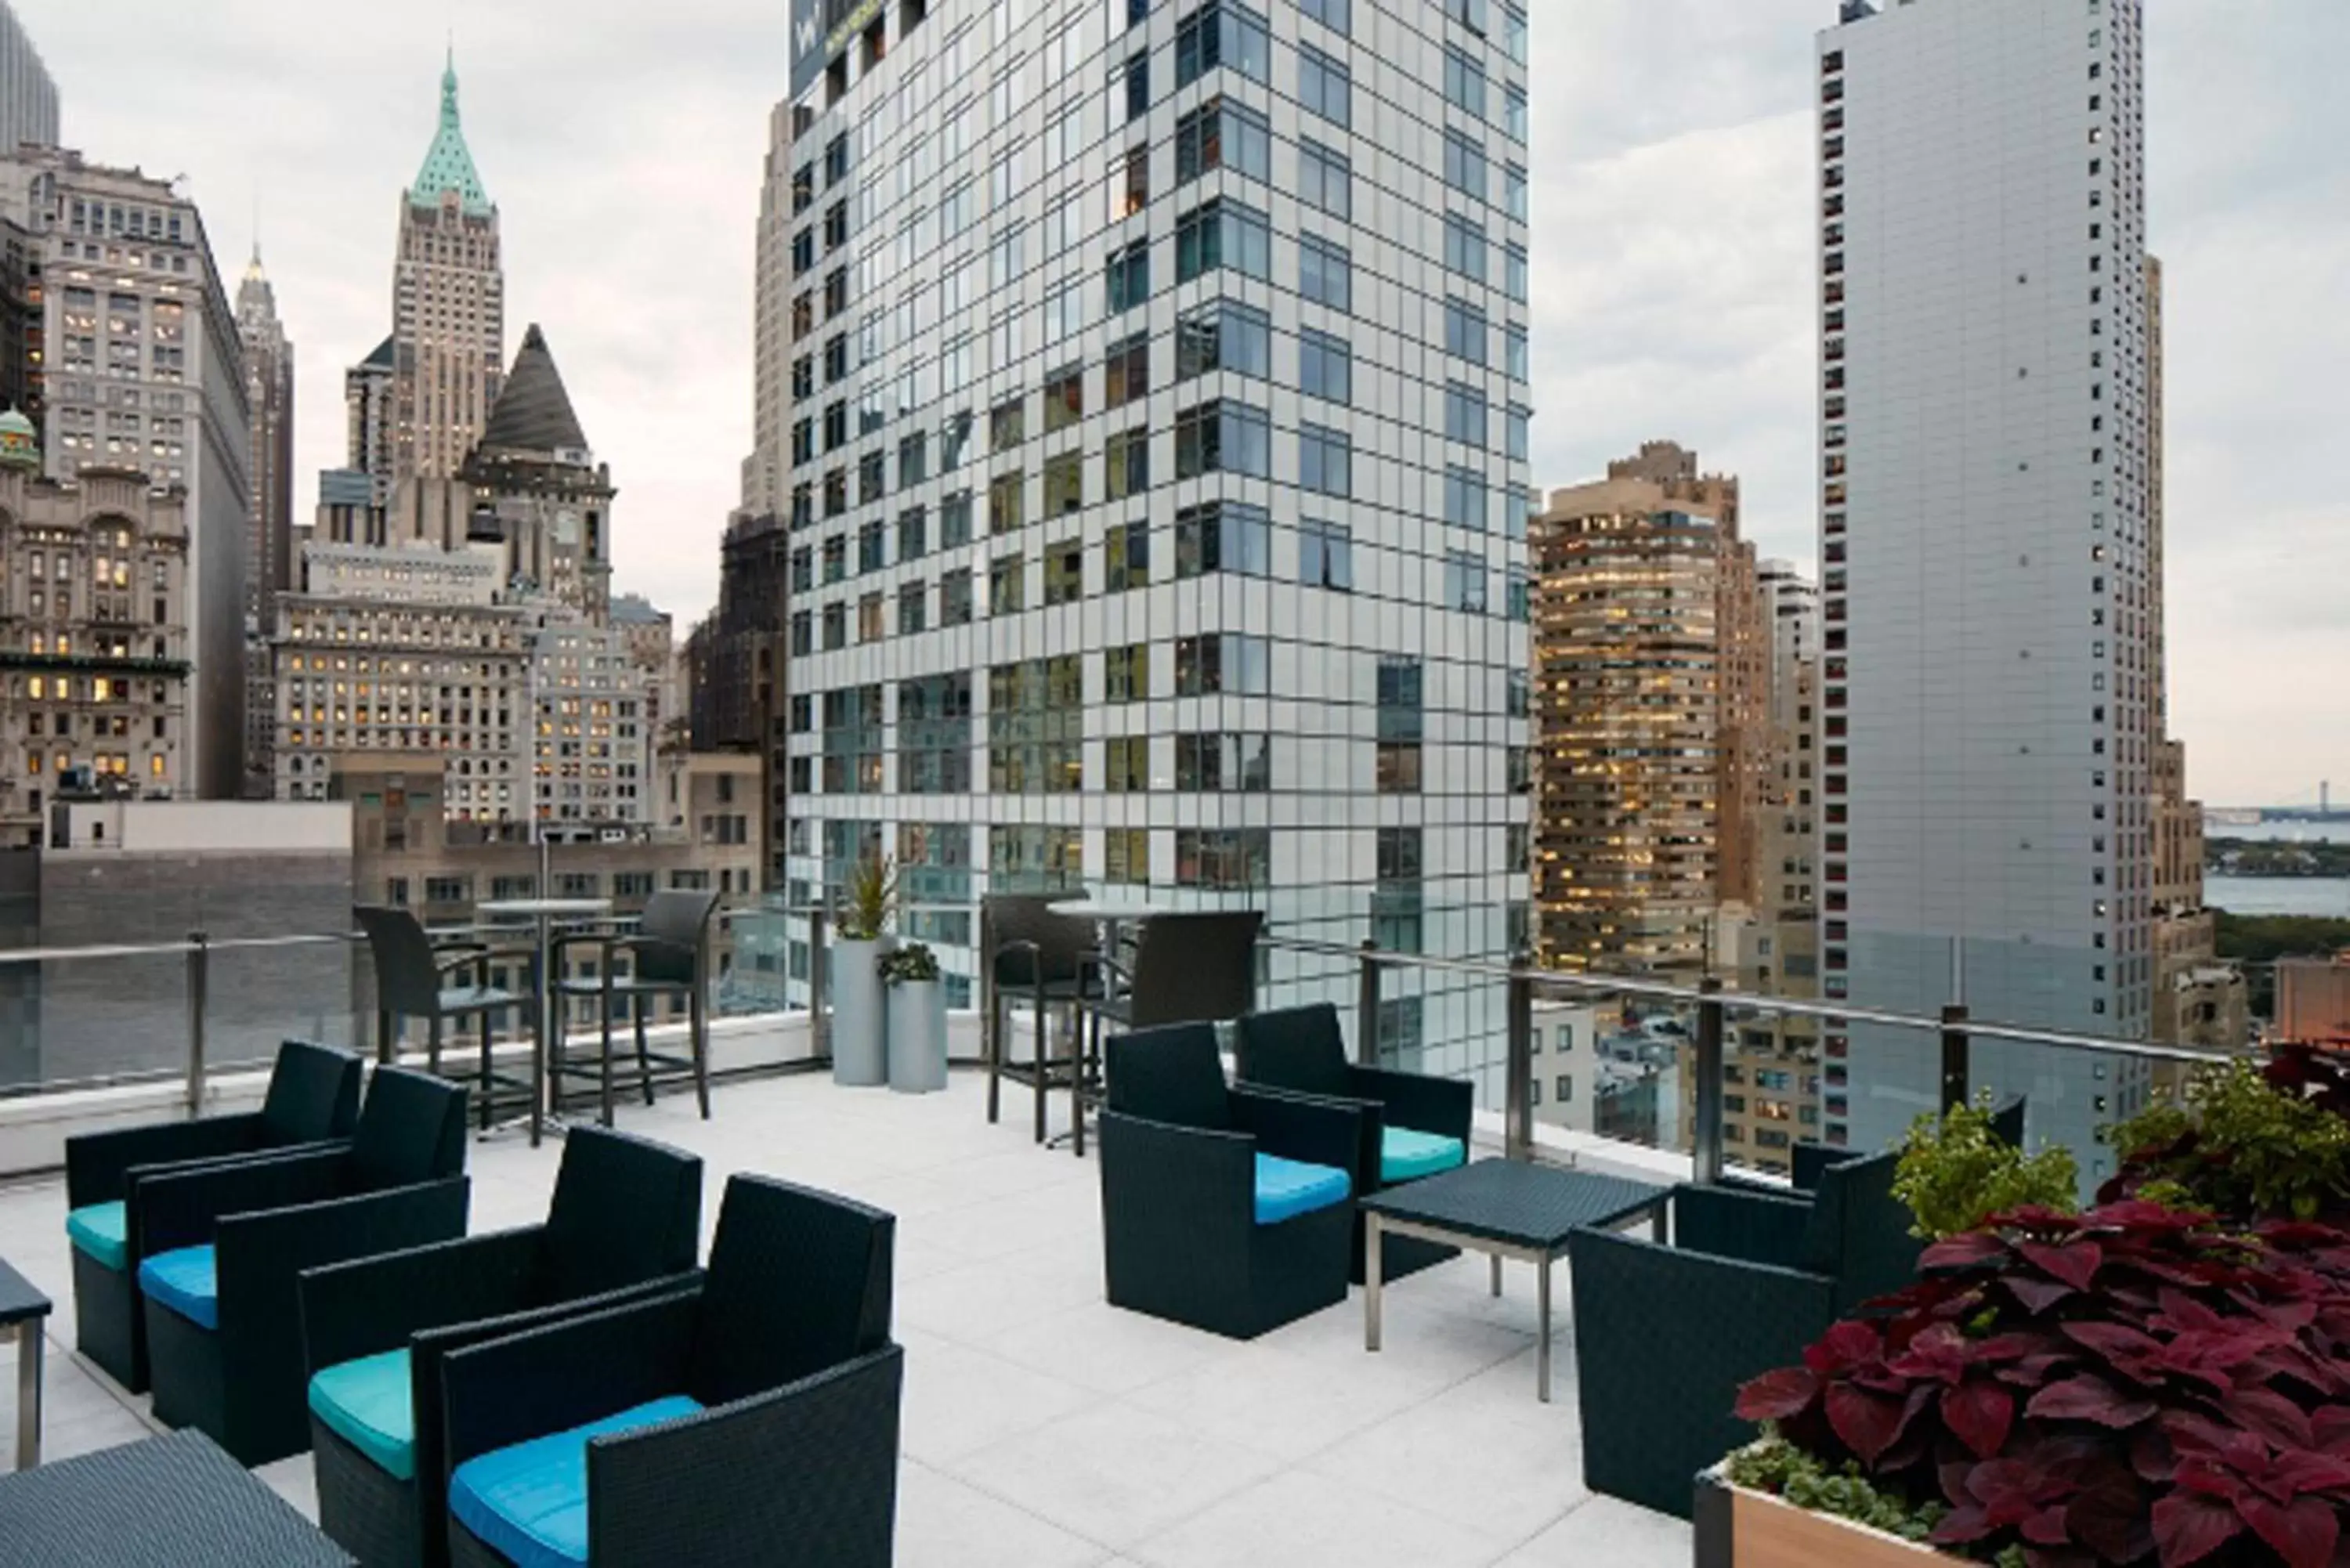 Seating area, Patio/Outdoor Area in Club Quarters Hotel World Trade Center, New York